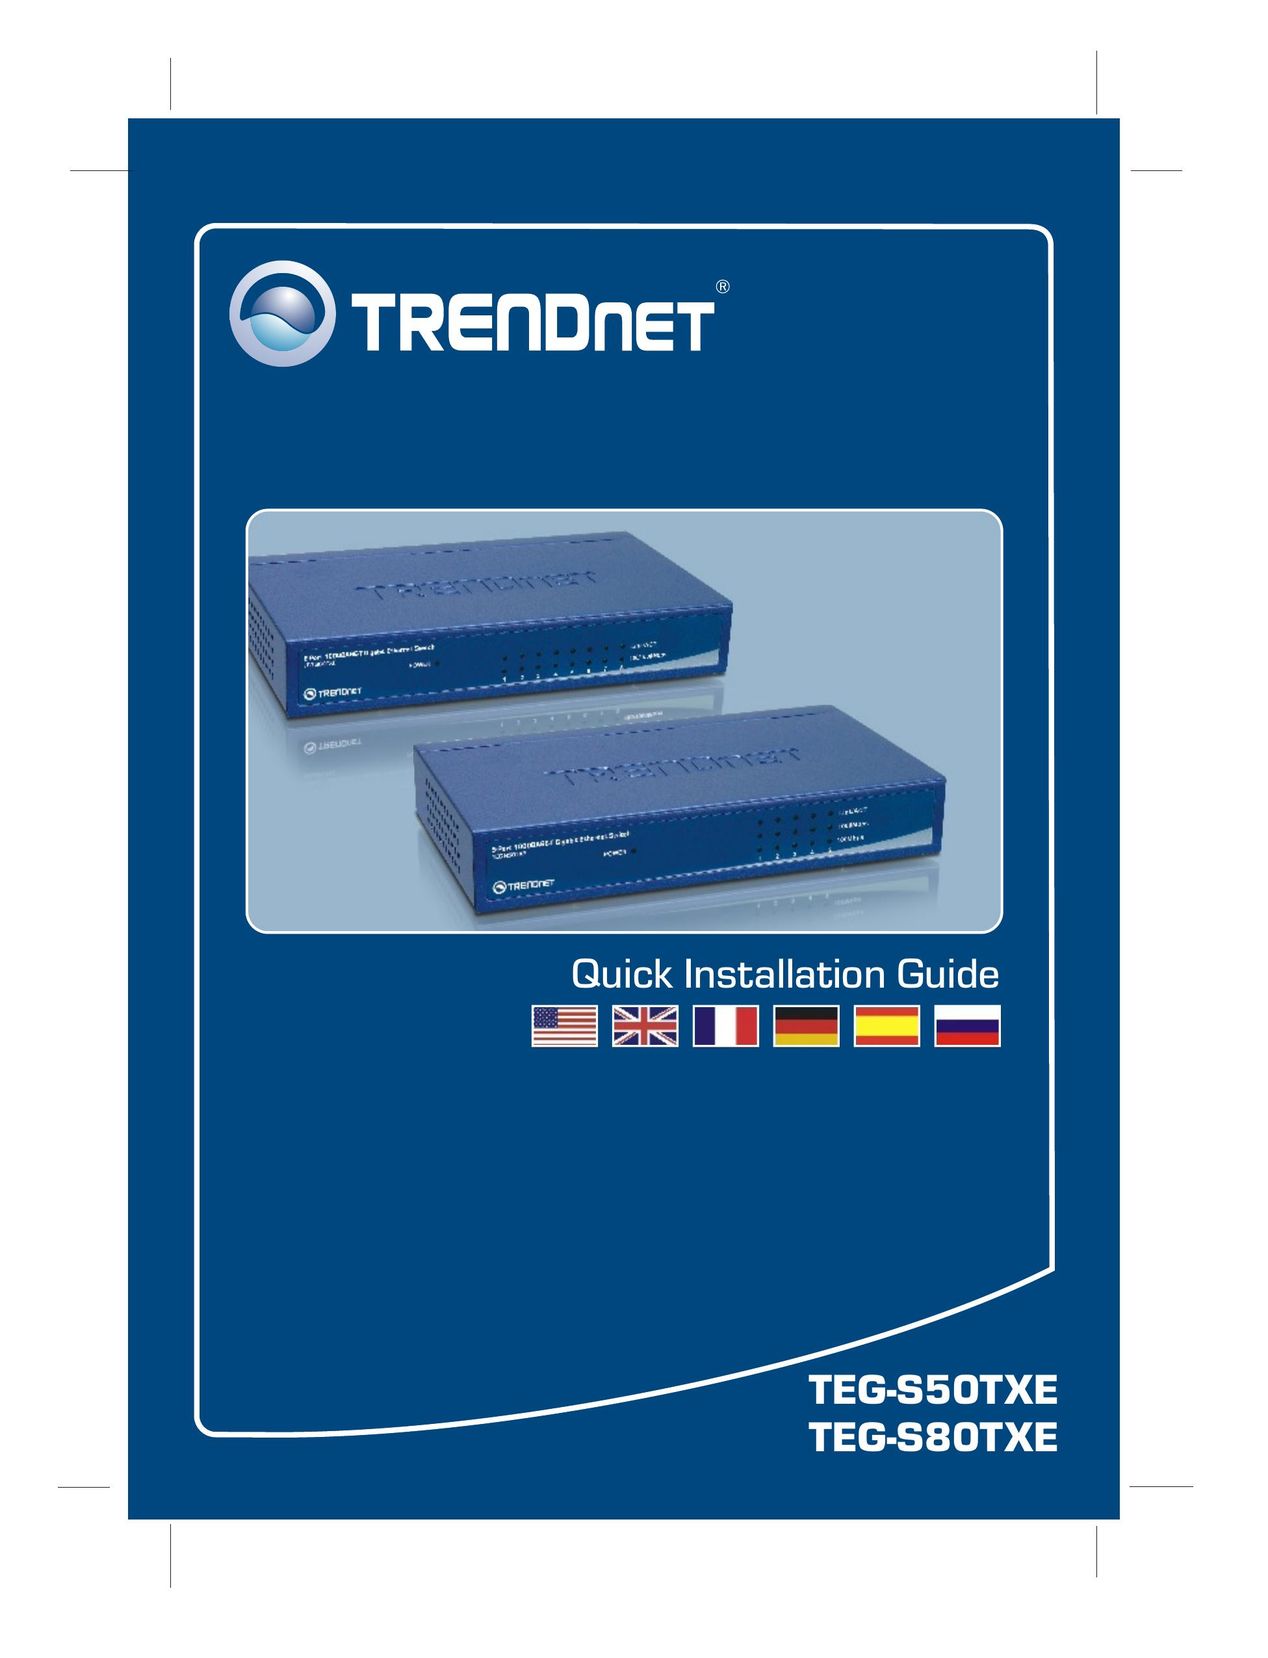 TRENDnet Gigabyte Ethernet Switch with External Power Supply Computer Hardware User Manual